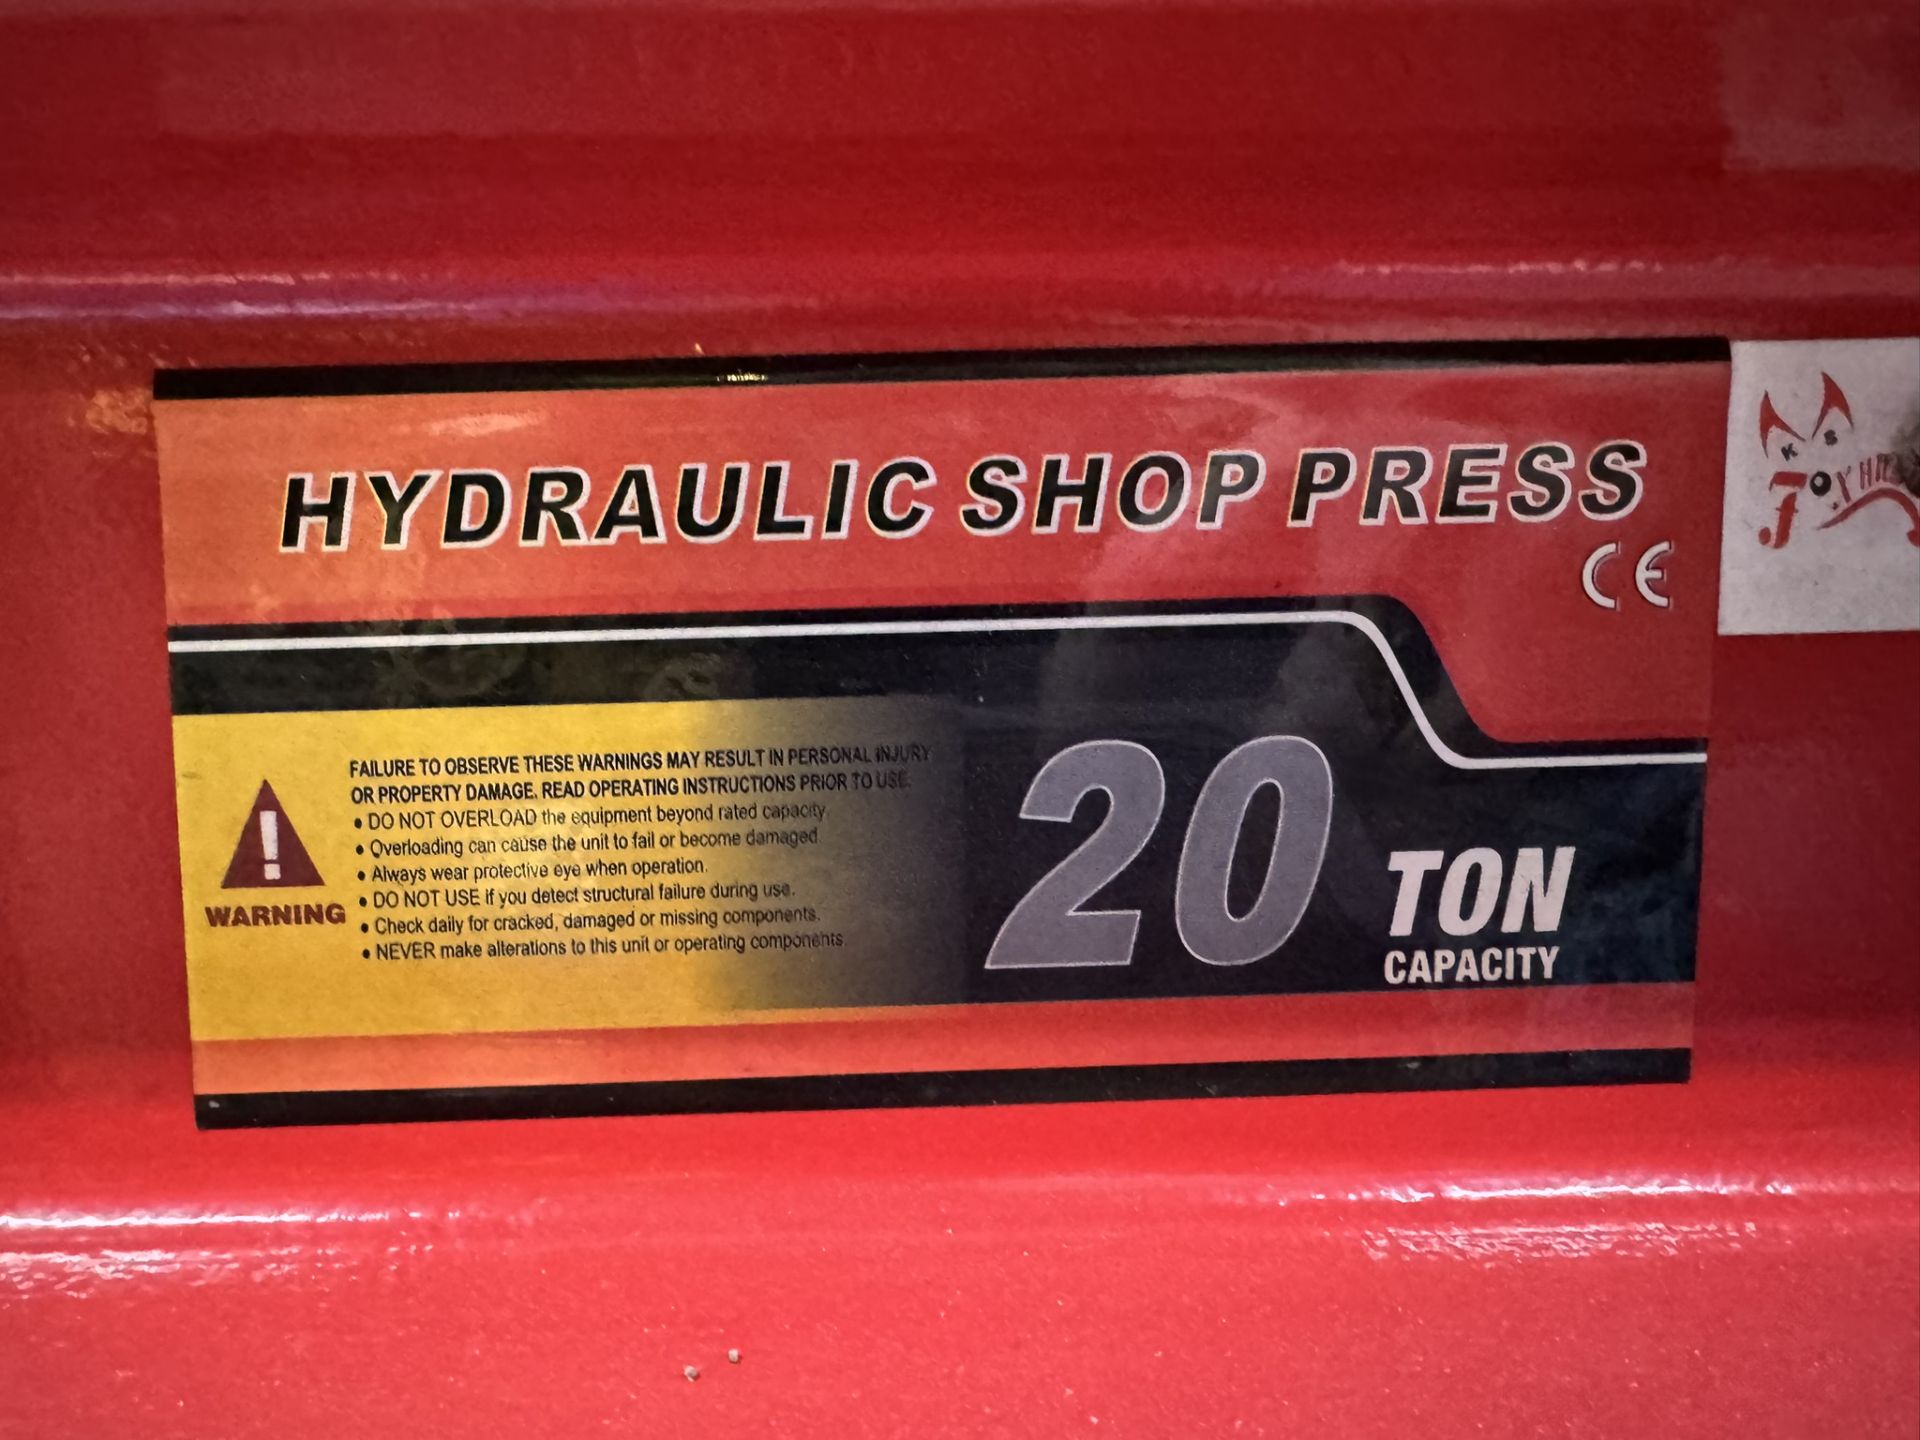 KMD ZD06201 20 Tonne Floor Standing Hydraulic Press - Image 5 of 7